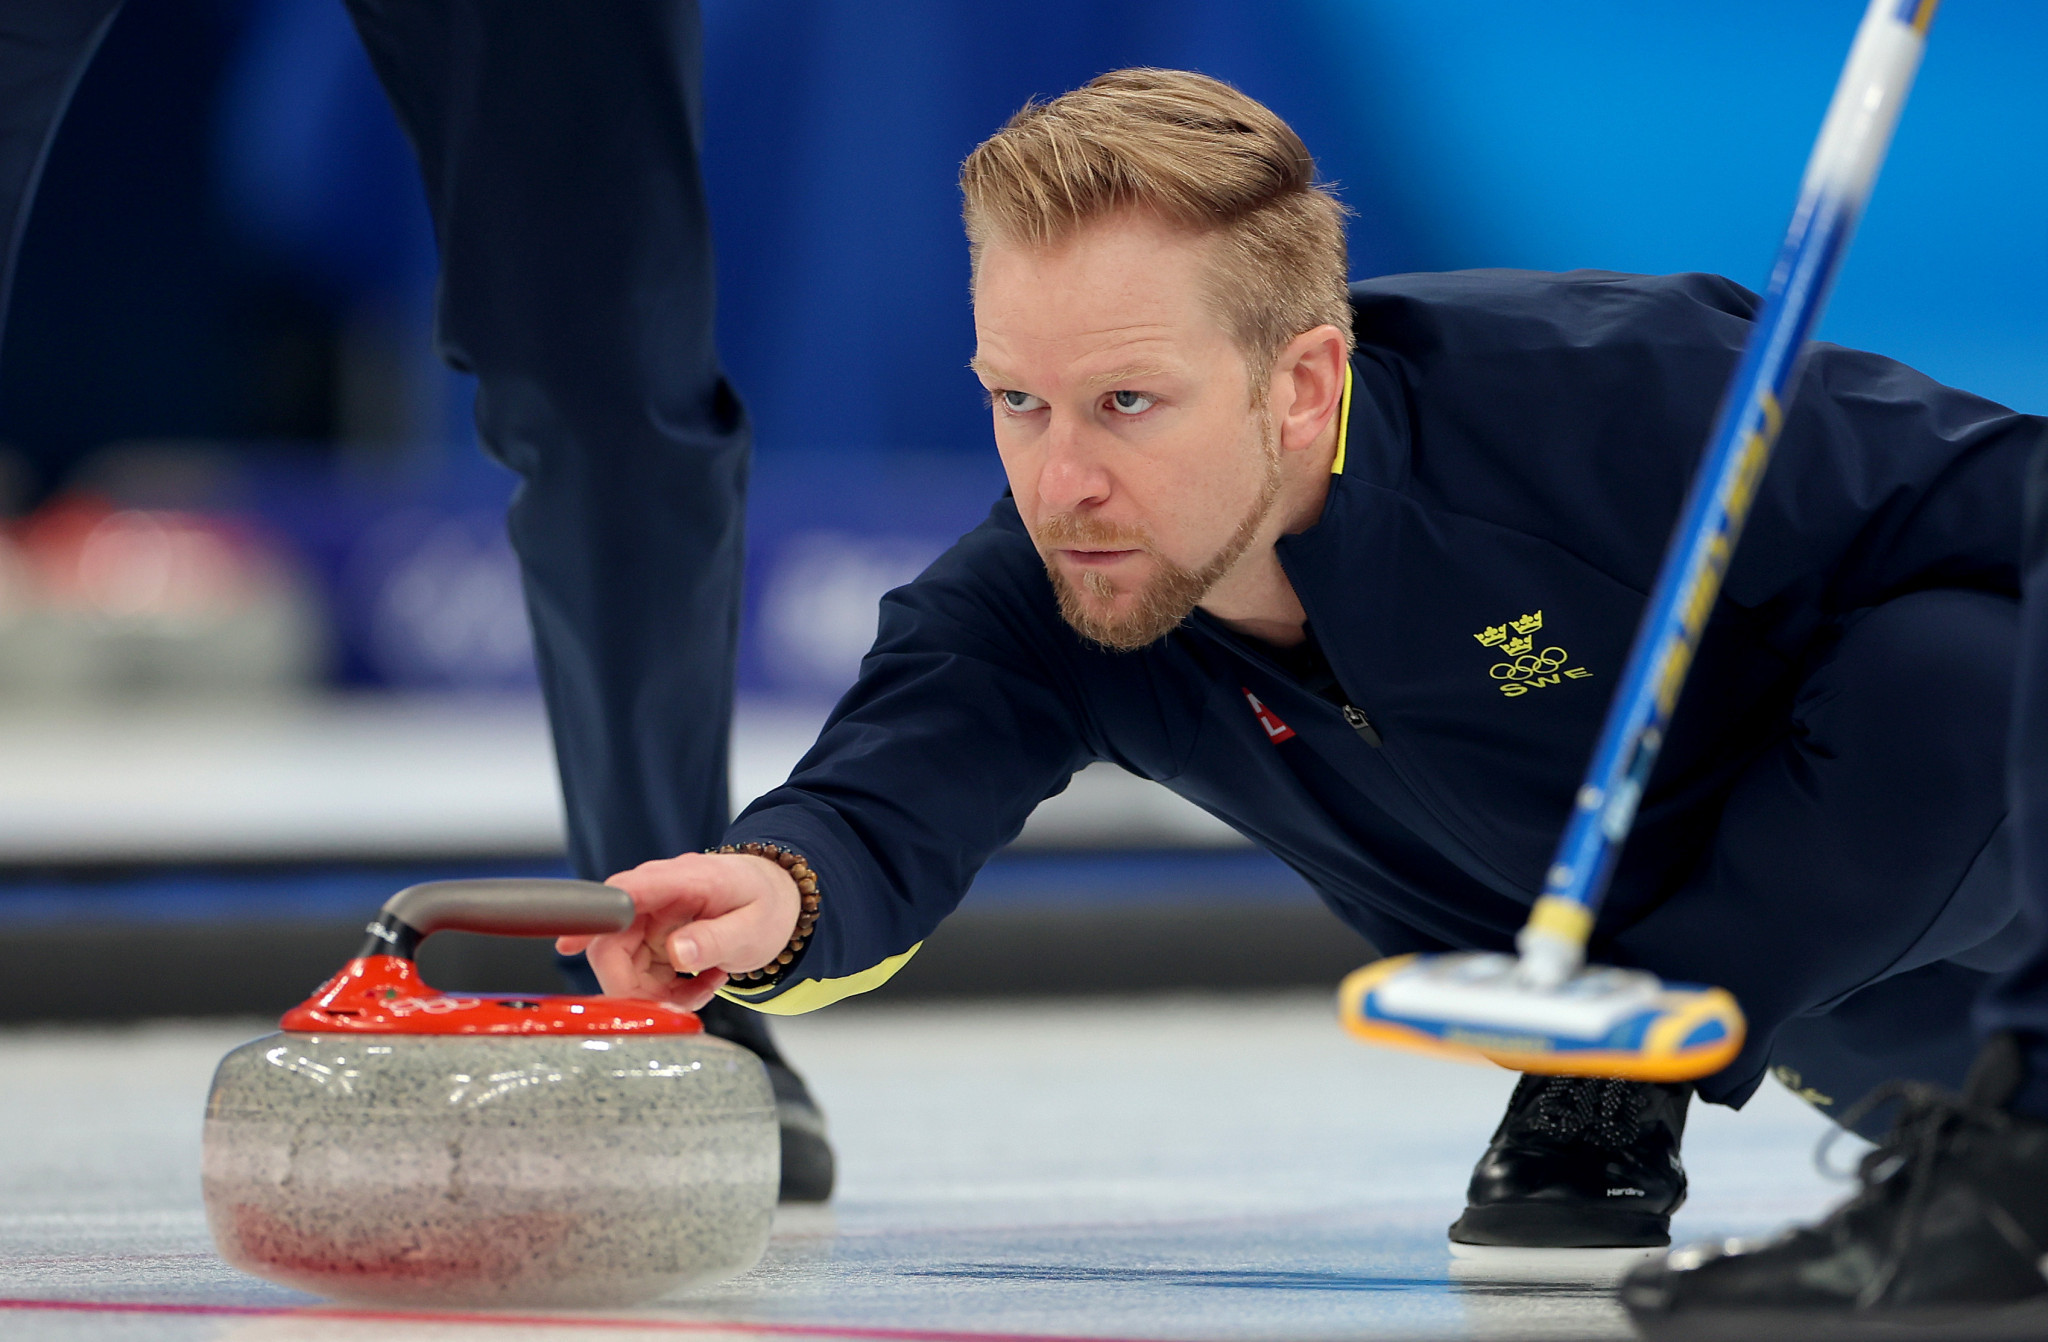 Edin and Sweden march on at World Men's Curling Championship